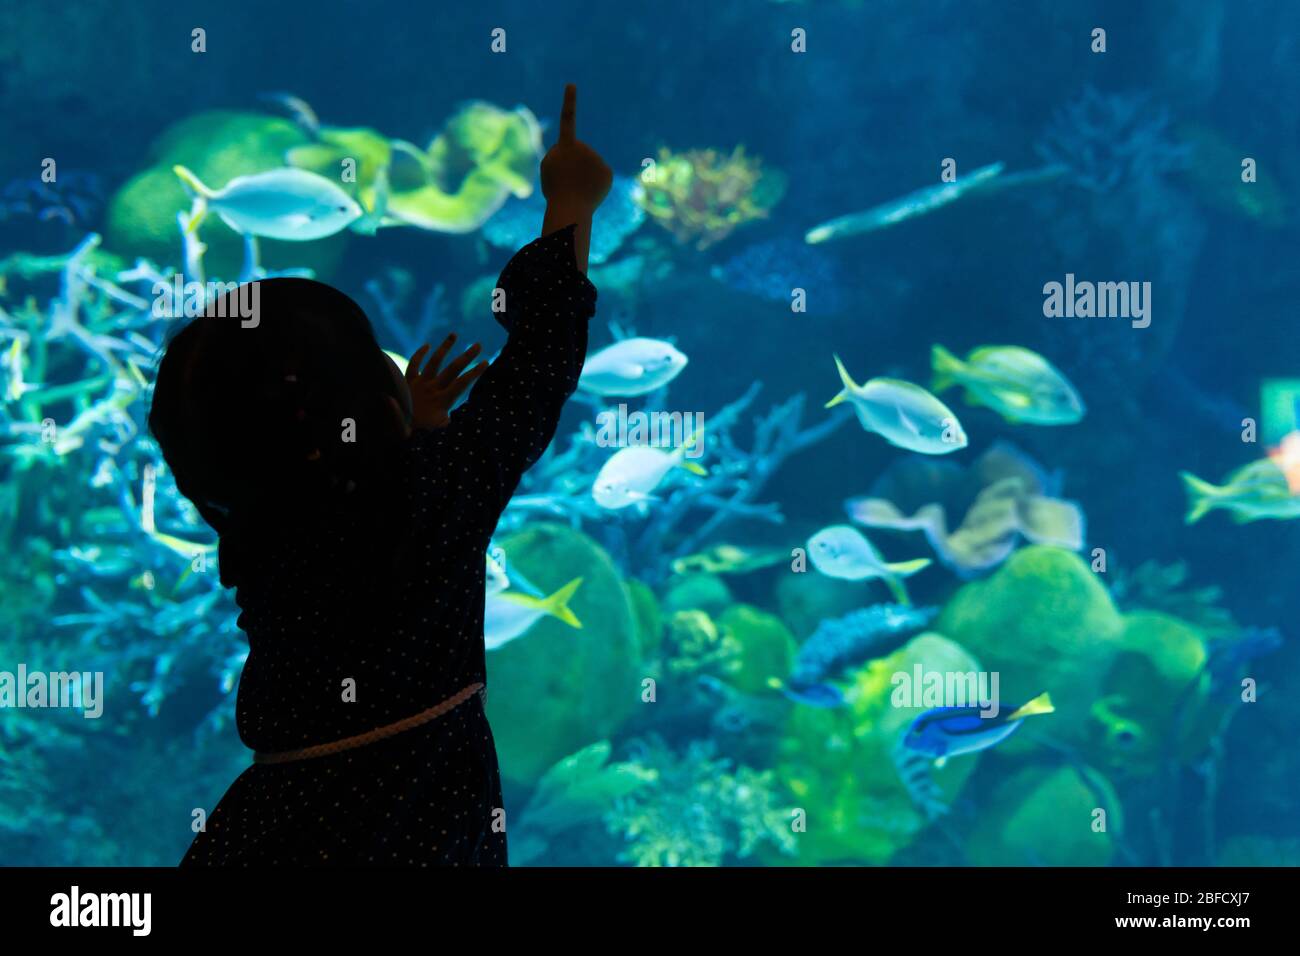 Silhouette of a girl enjoying at fishs in the aquarium. Stock Photo